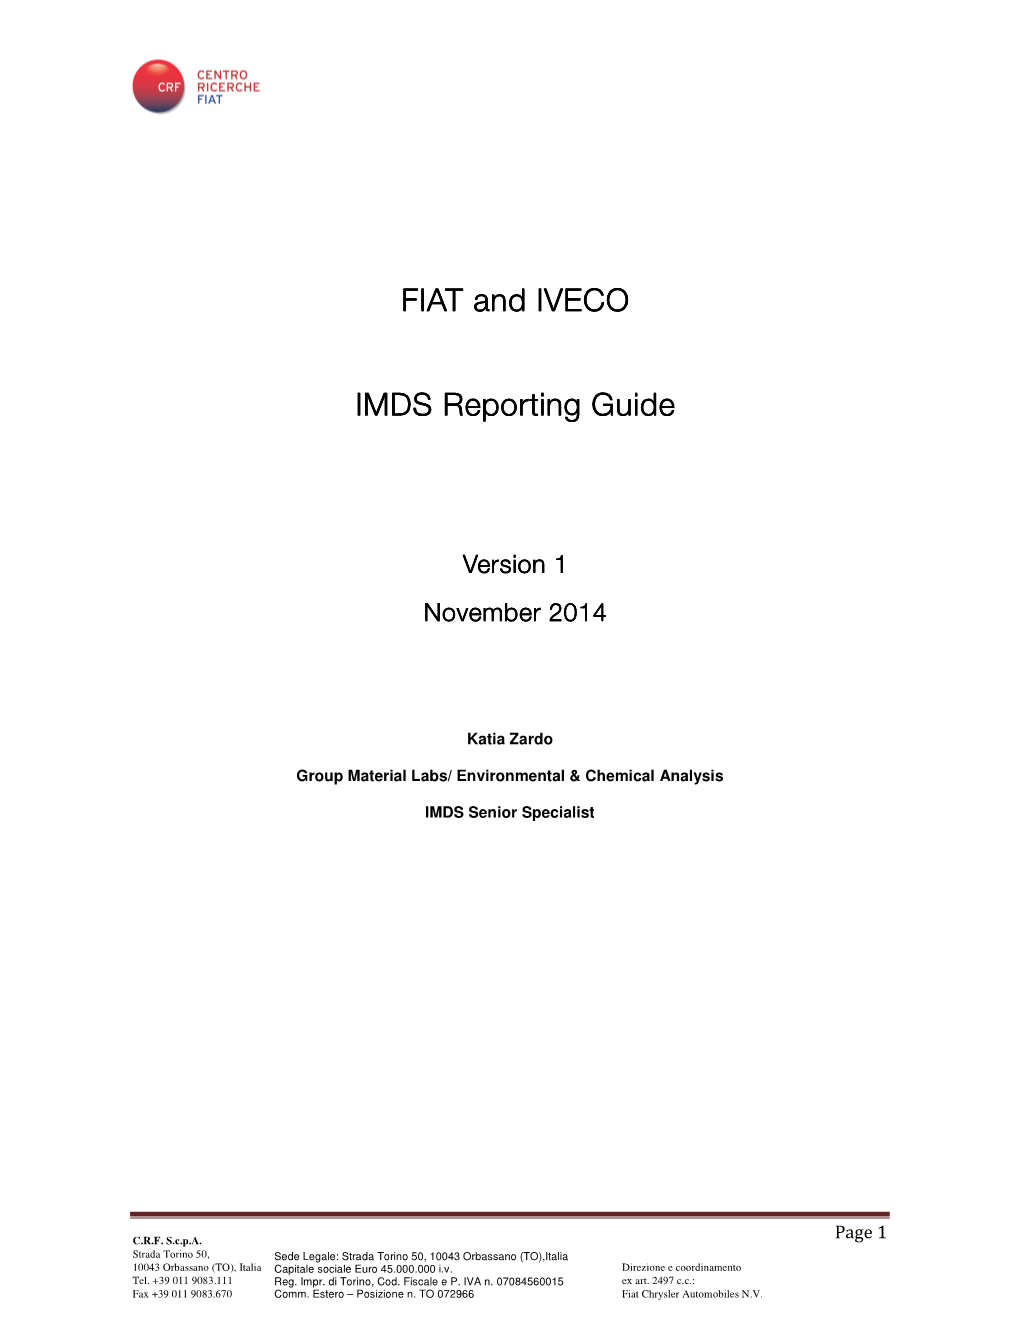 FIAT and IVECO FIAT and IVECO IMDS Reporting Guide IMDS